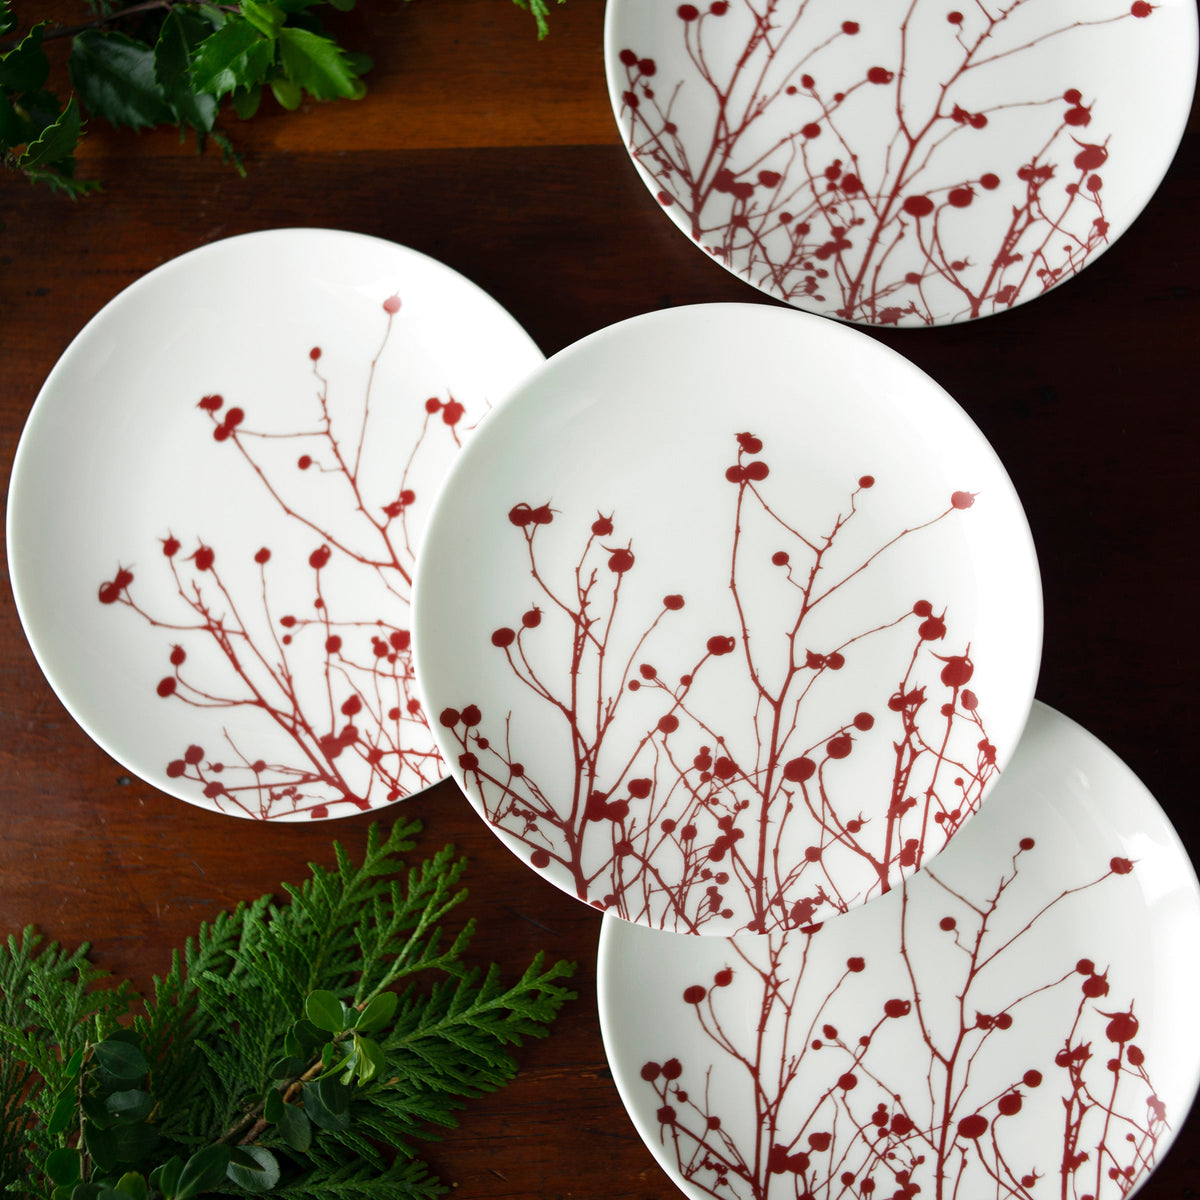 Four white porcelain Winterberries Small Plates by Caskata Artisanal Home, with red botanical designs reminiscent of Winter berries, are arranged on a wooden table with some green foliage.